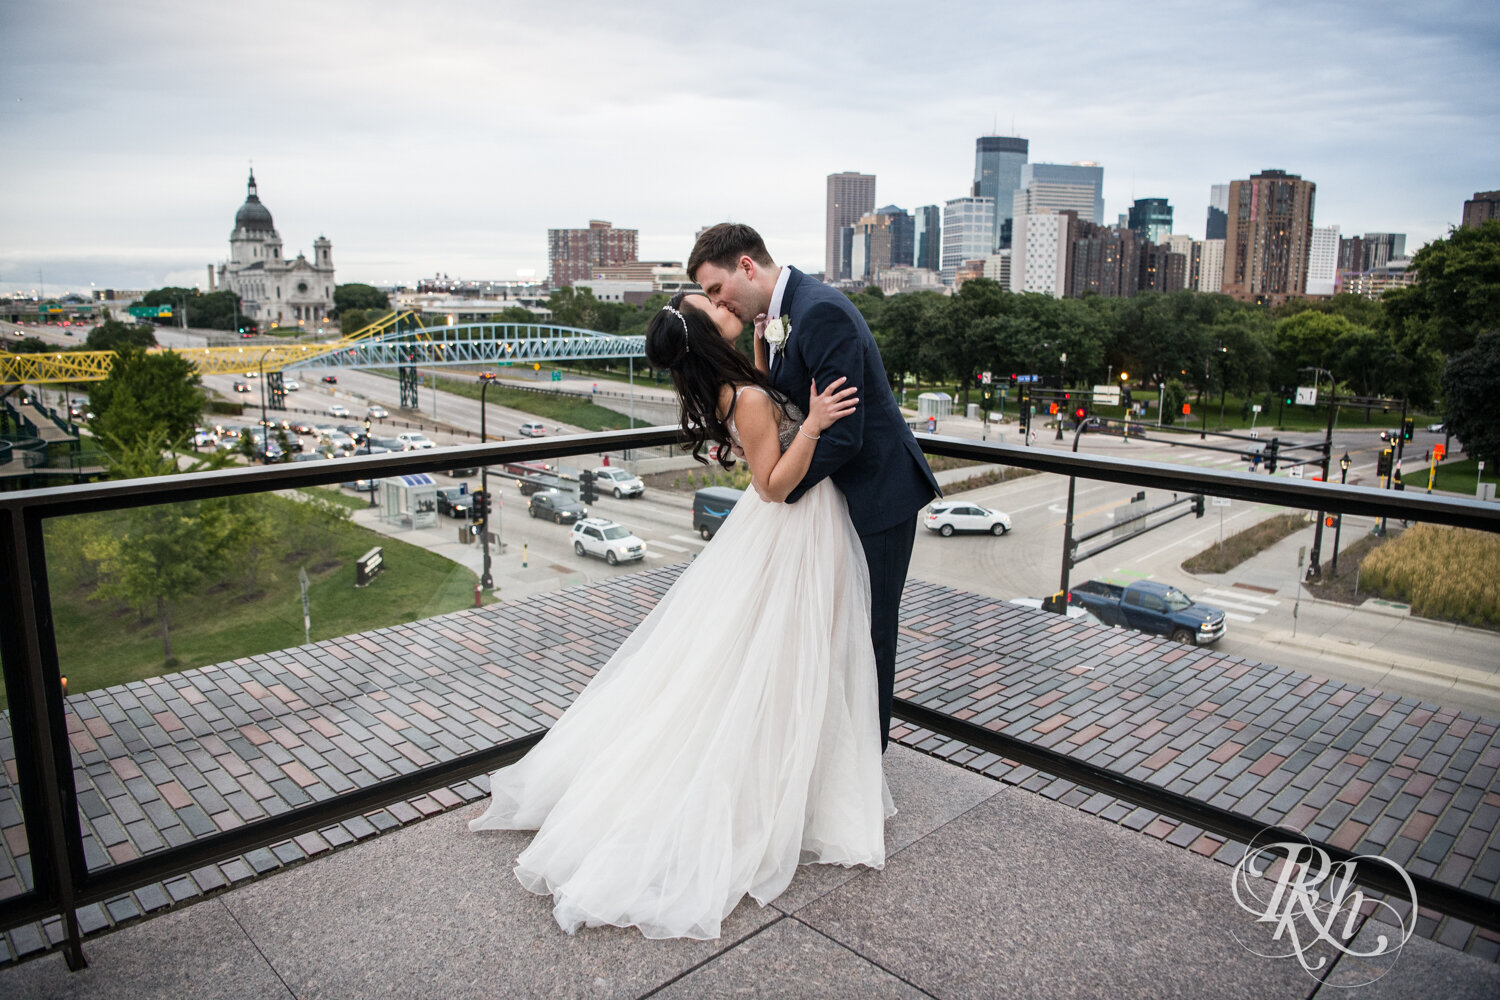 Bride and groom kiss during cocktail hour on rooftop of Walker Art Center in Minneapolis, Minnesota. 